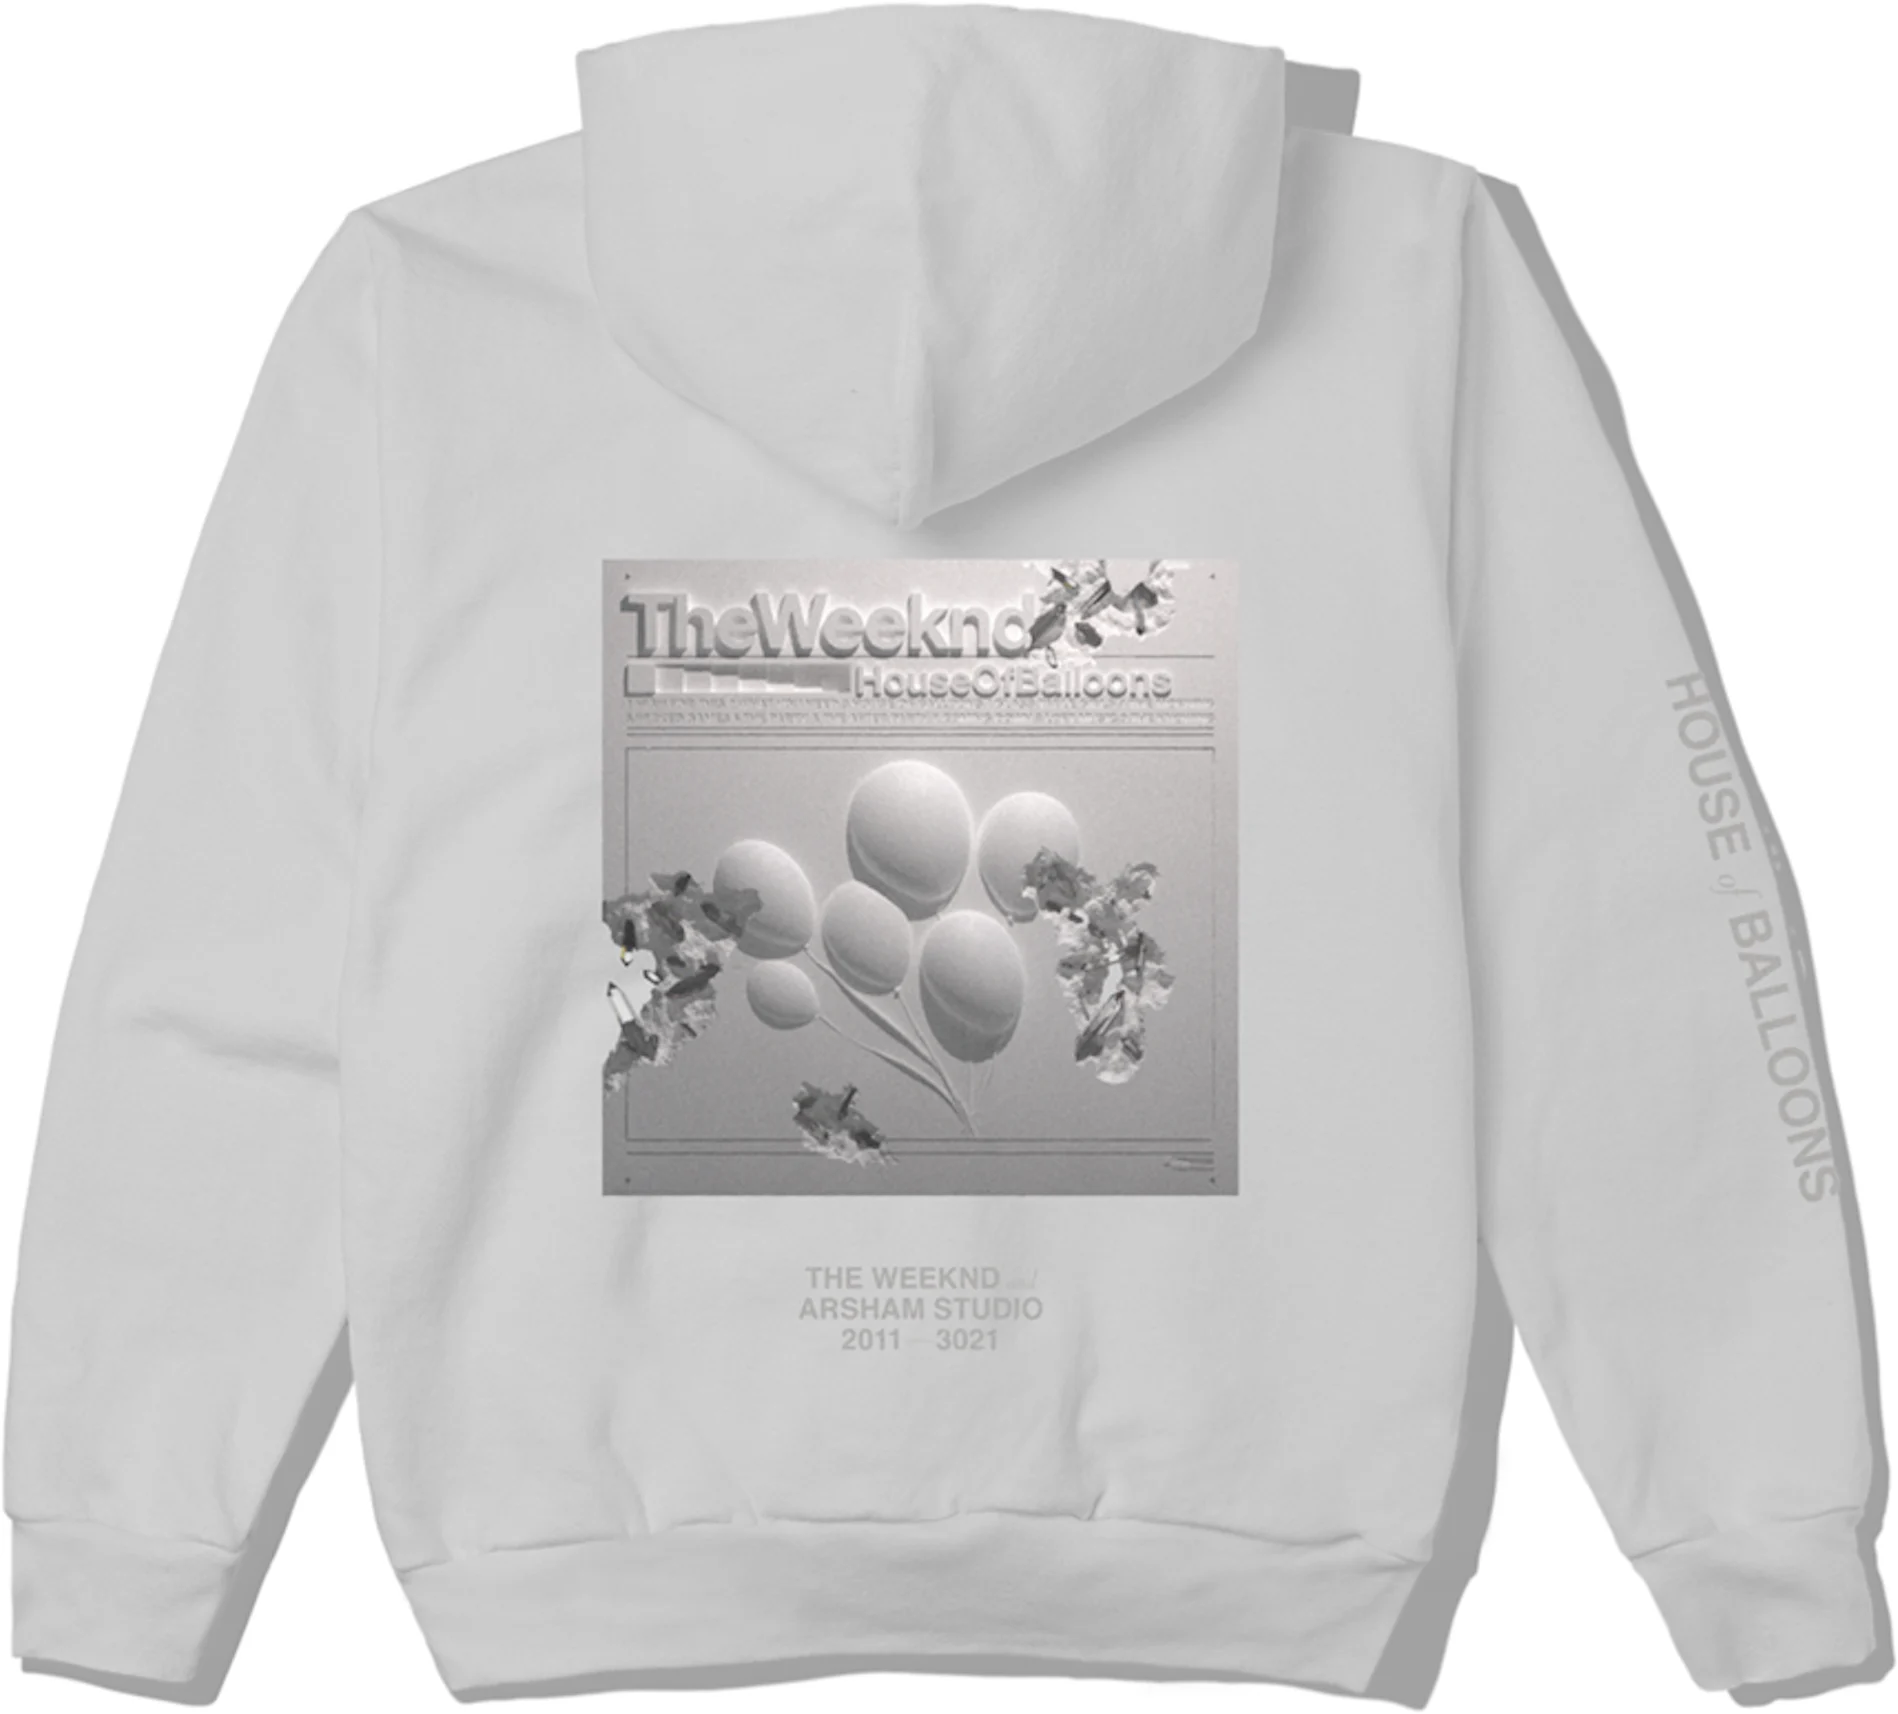 The Weeknd x Daniel Arsham House Of Balloons Eroded Cover Pullover Hood Grey